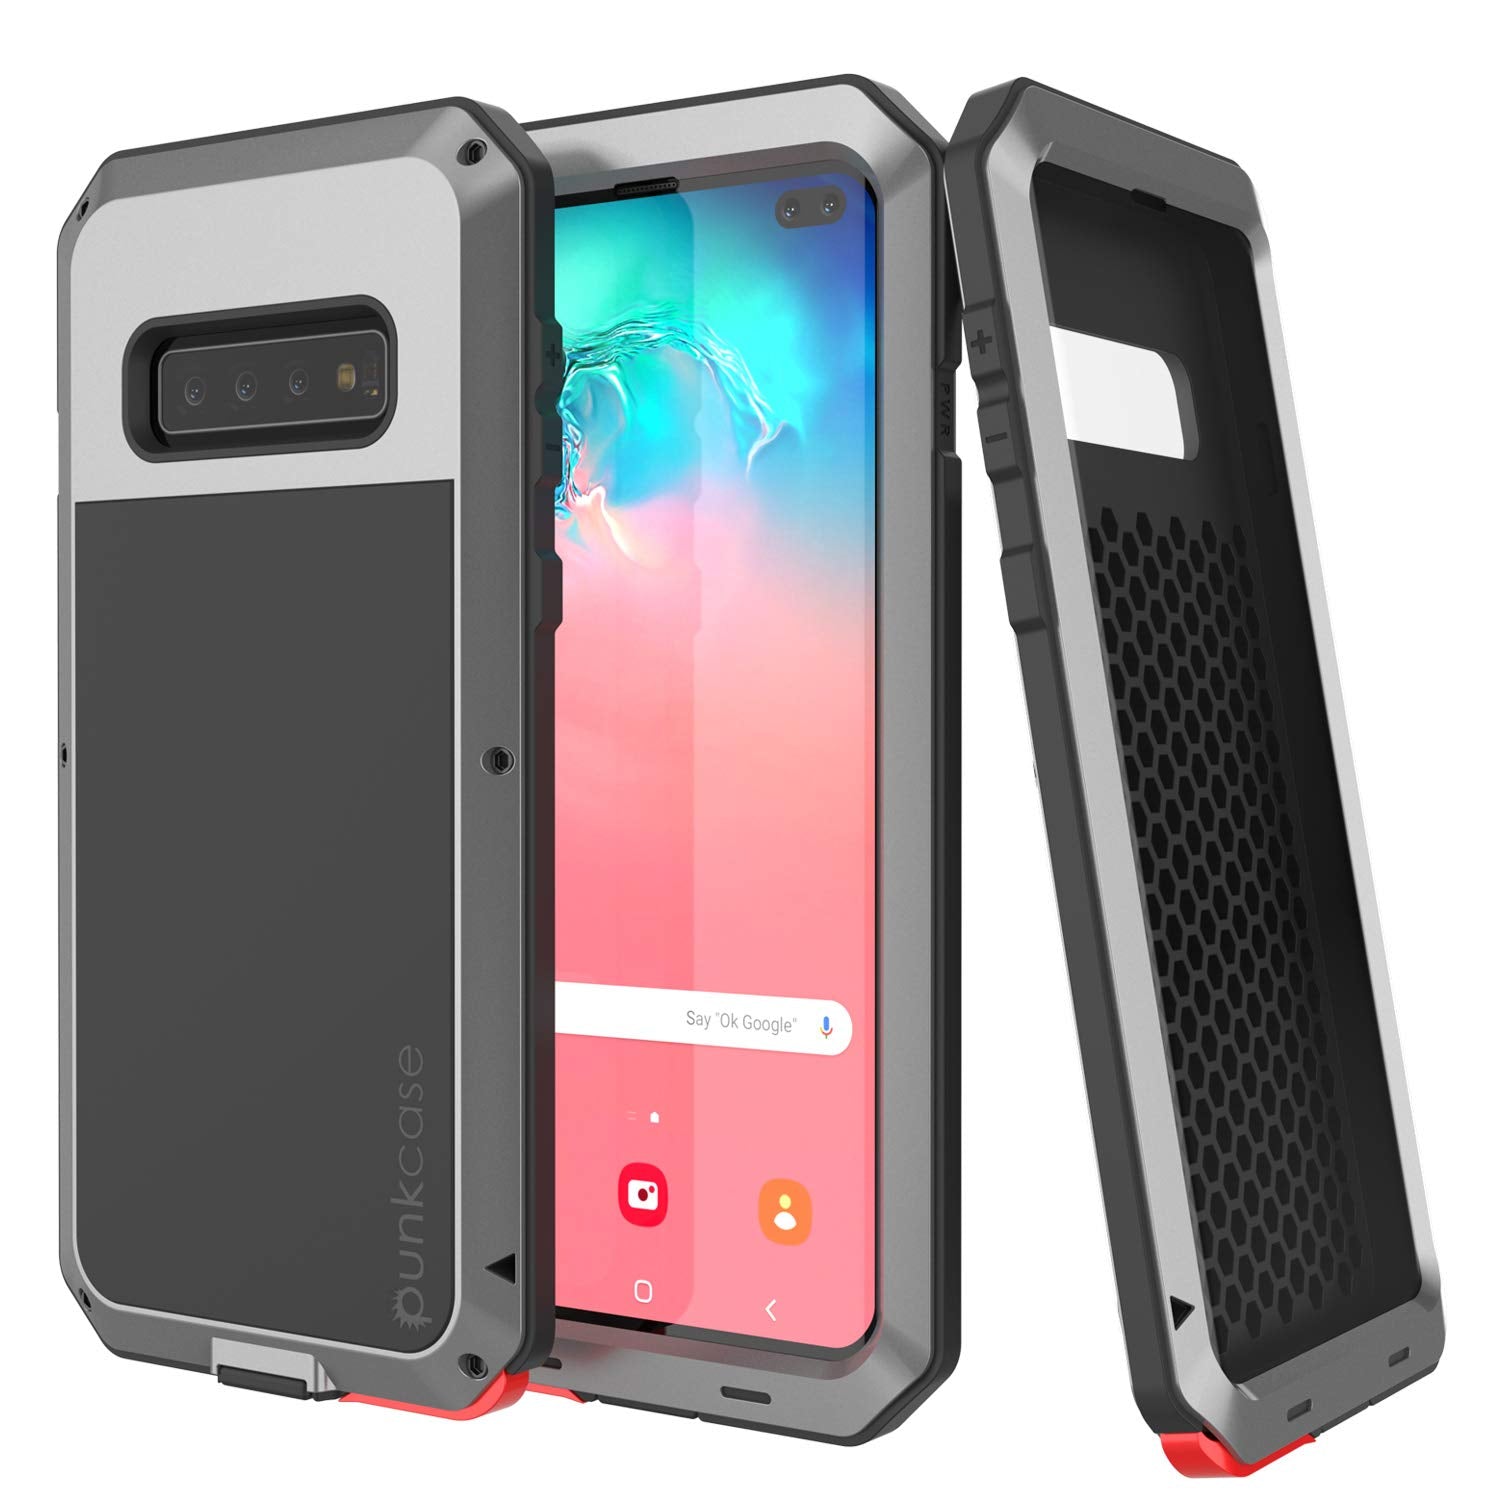 Galaxy S10+ Plus Metal Case, Heavy Duty Military Grade Rugged Armor Cover [Silver]